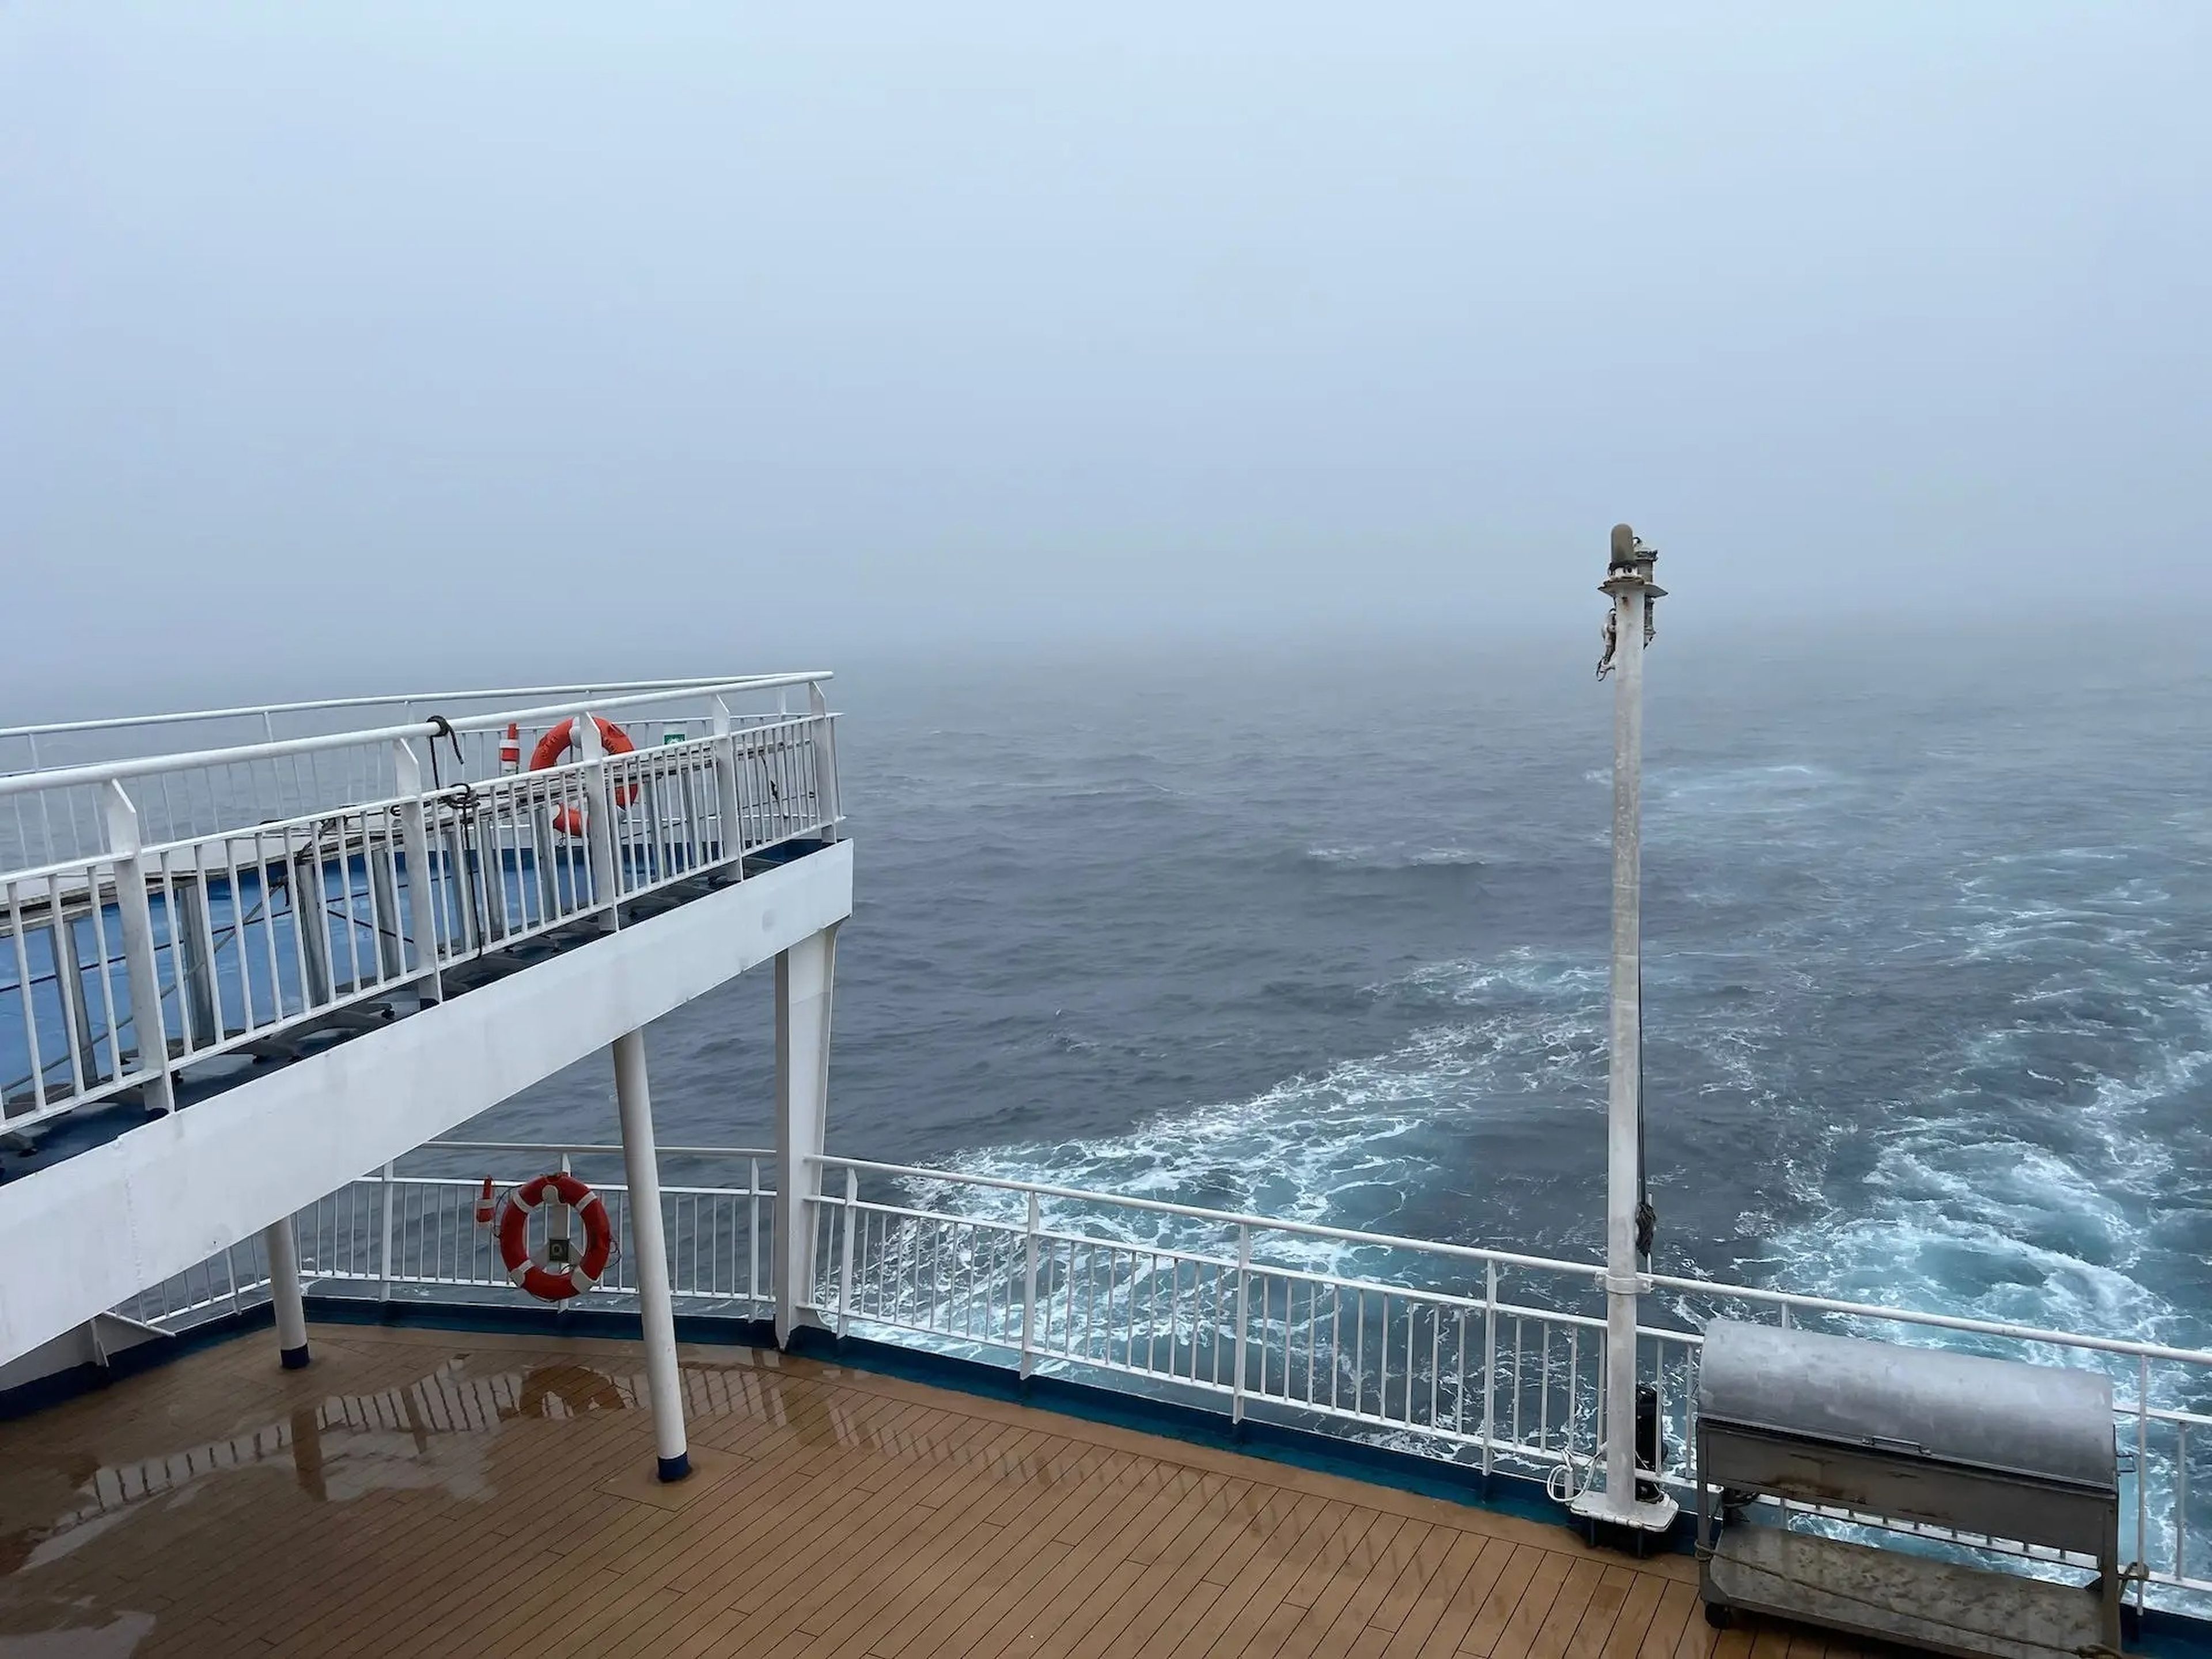 Day two of sailing through the Drake Passage on the way to Antarctica.